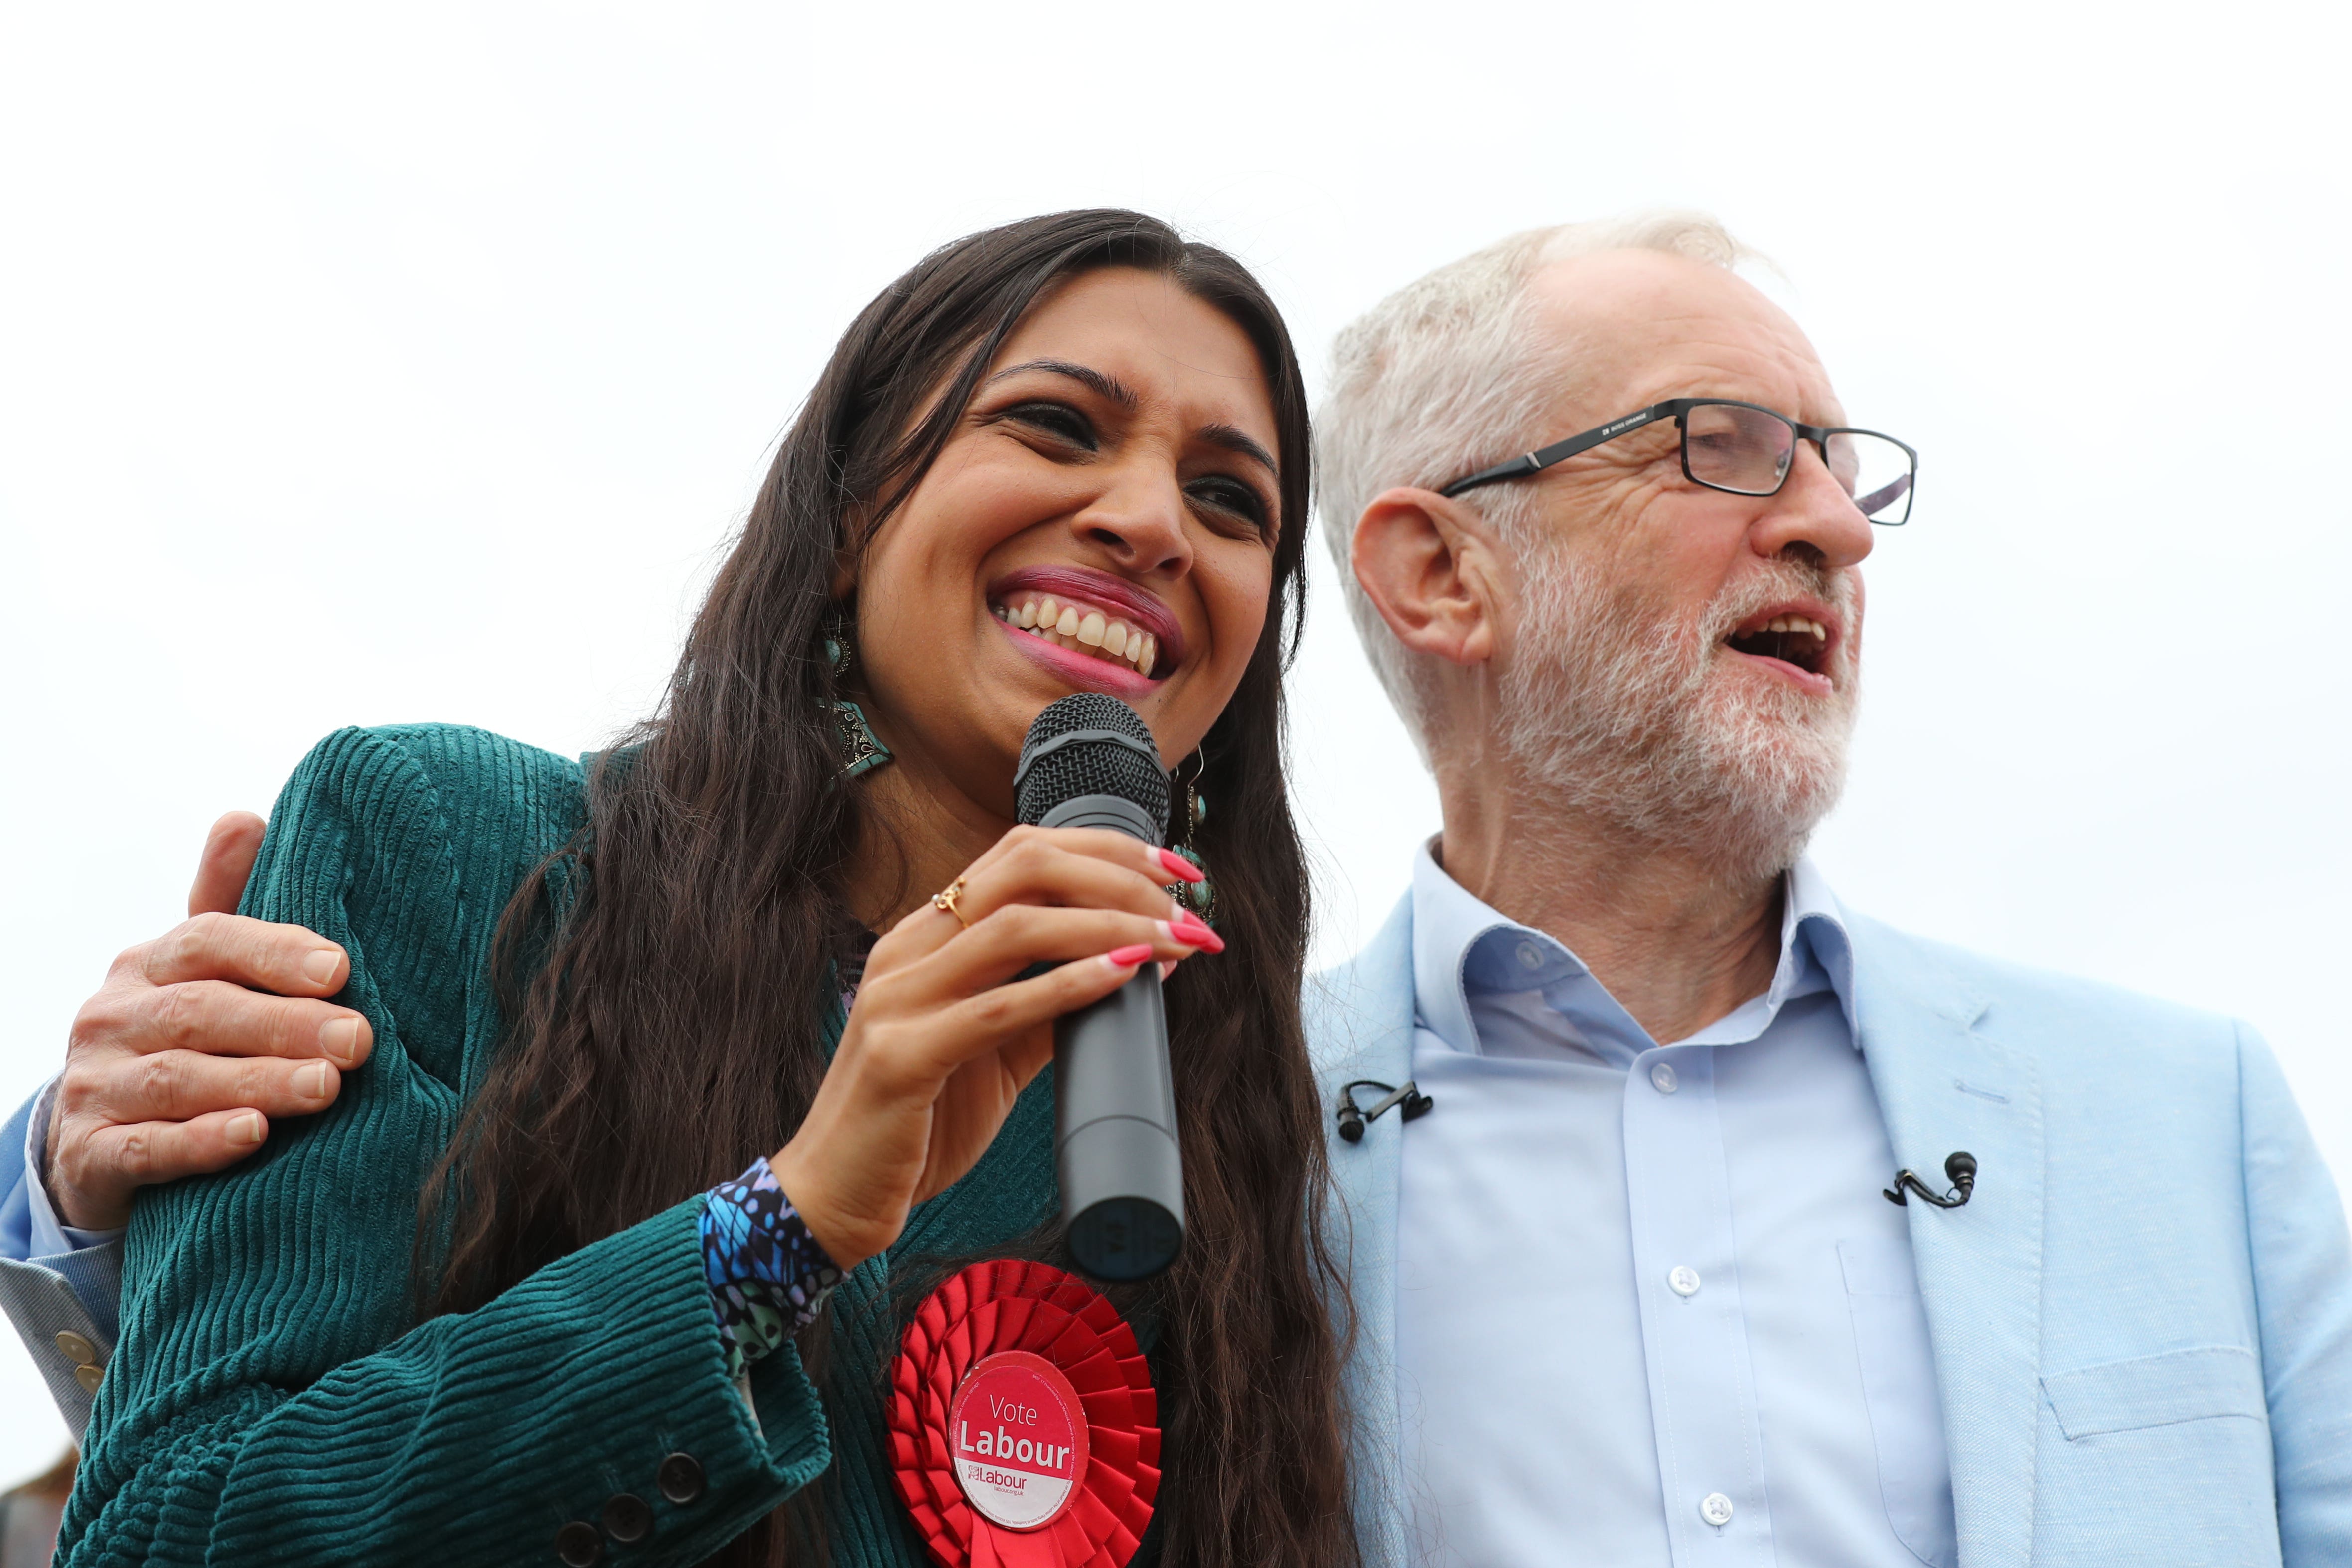 Faiza Shaheen and then-Labour leader Jeremy Corbyn at a rally in 2019 (Gareth Fuller/PA)